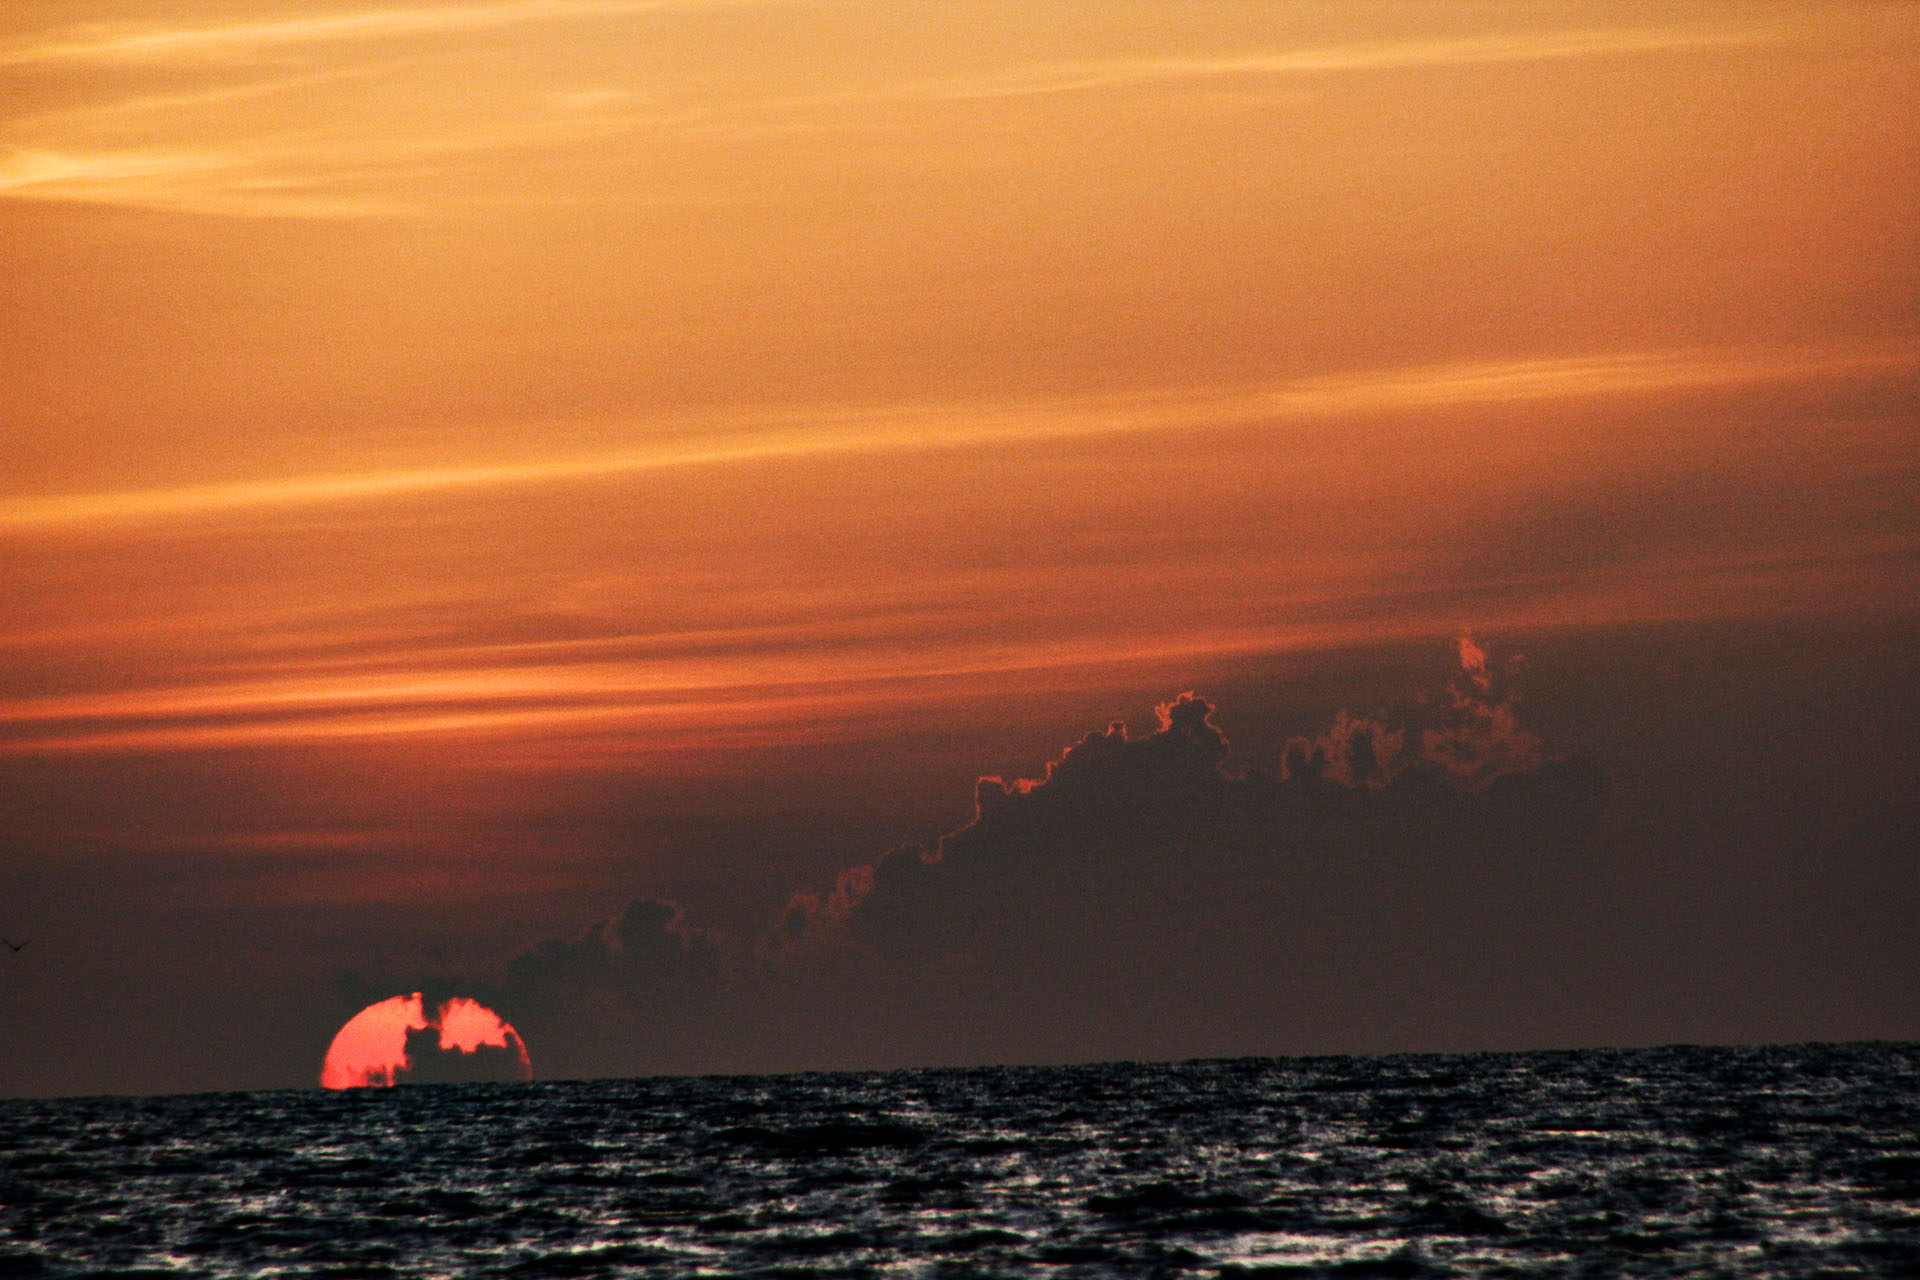 A Sunset off the Coast of Naples